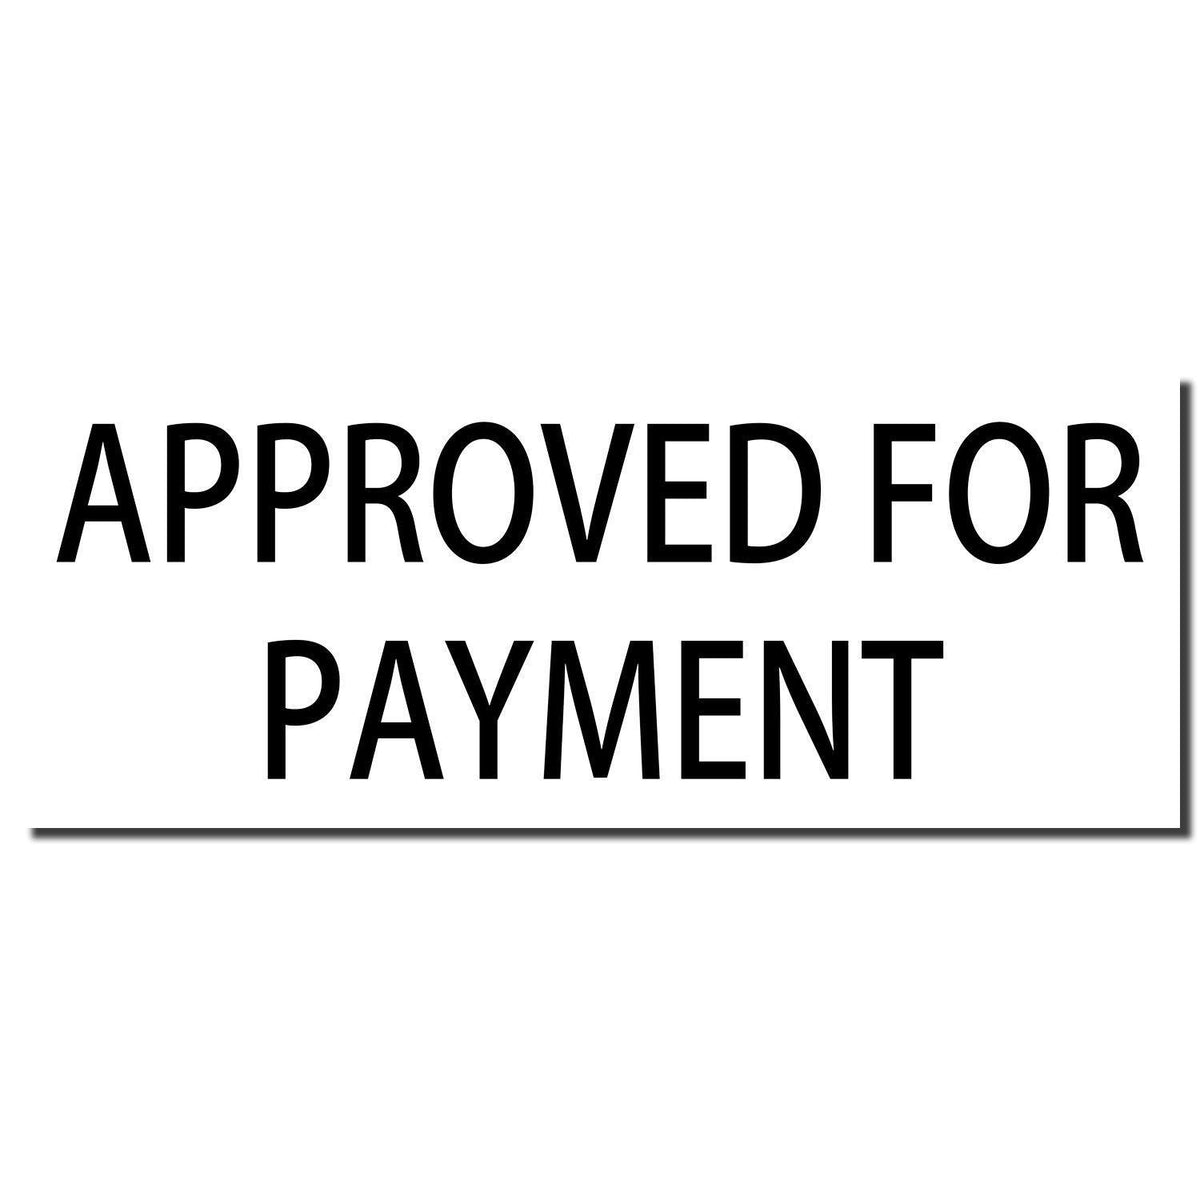 Enlarged Imprint Large Approved For Payment Rubber Stamp Sample